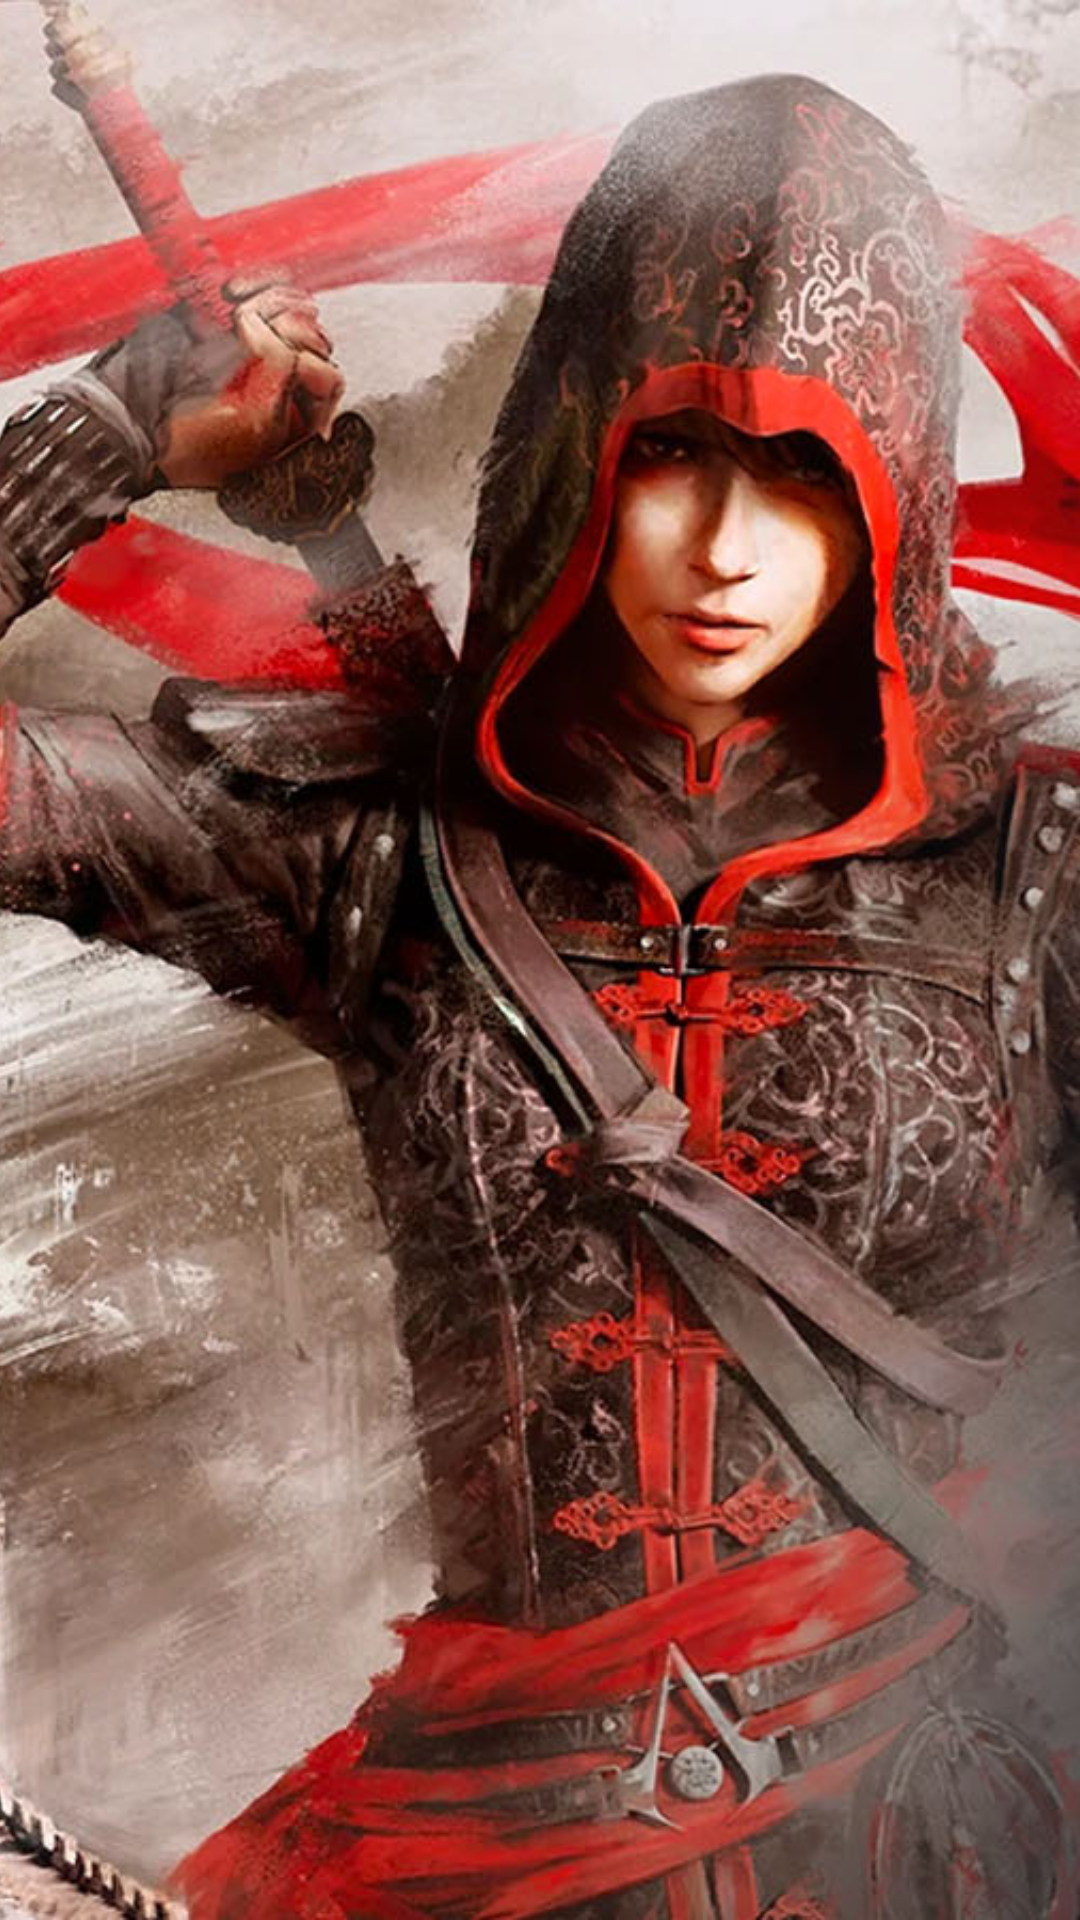 Assassin's Creed Codename Jade: Checkout the Details